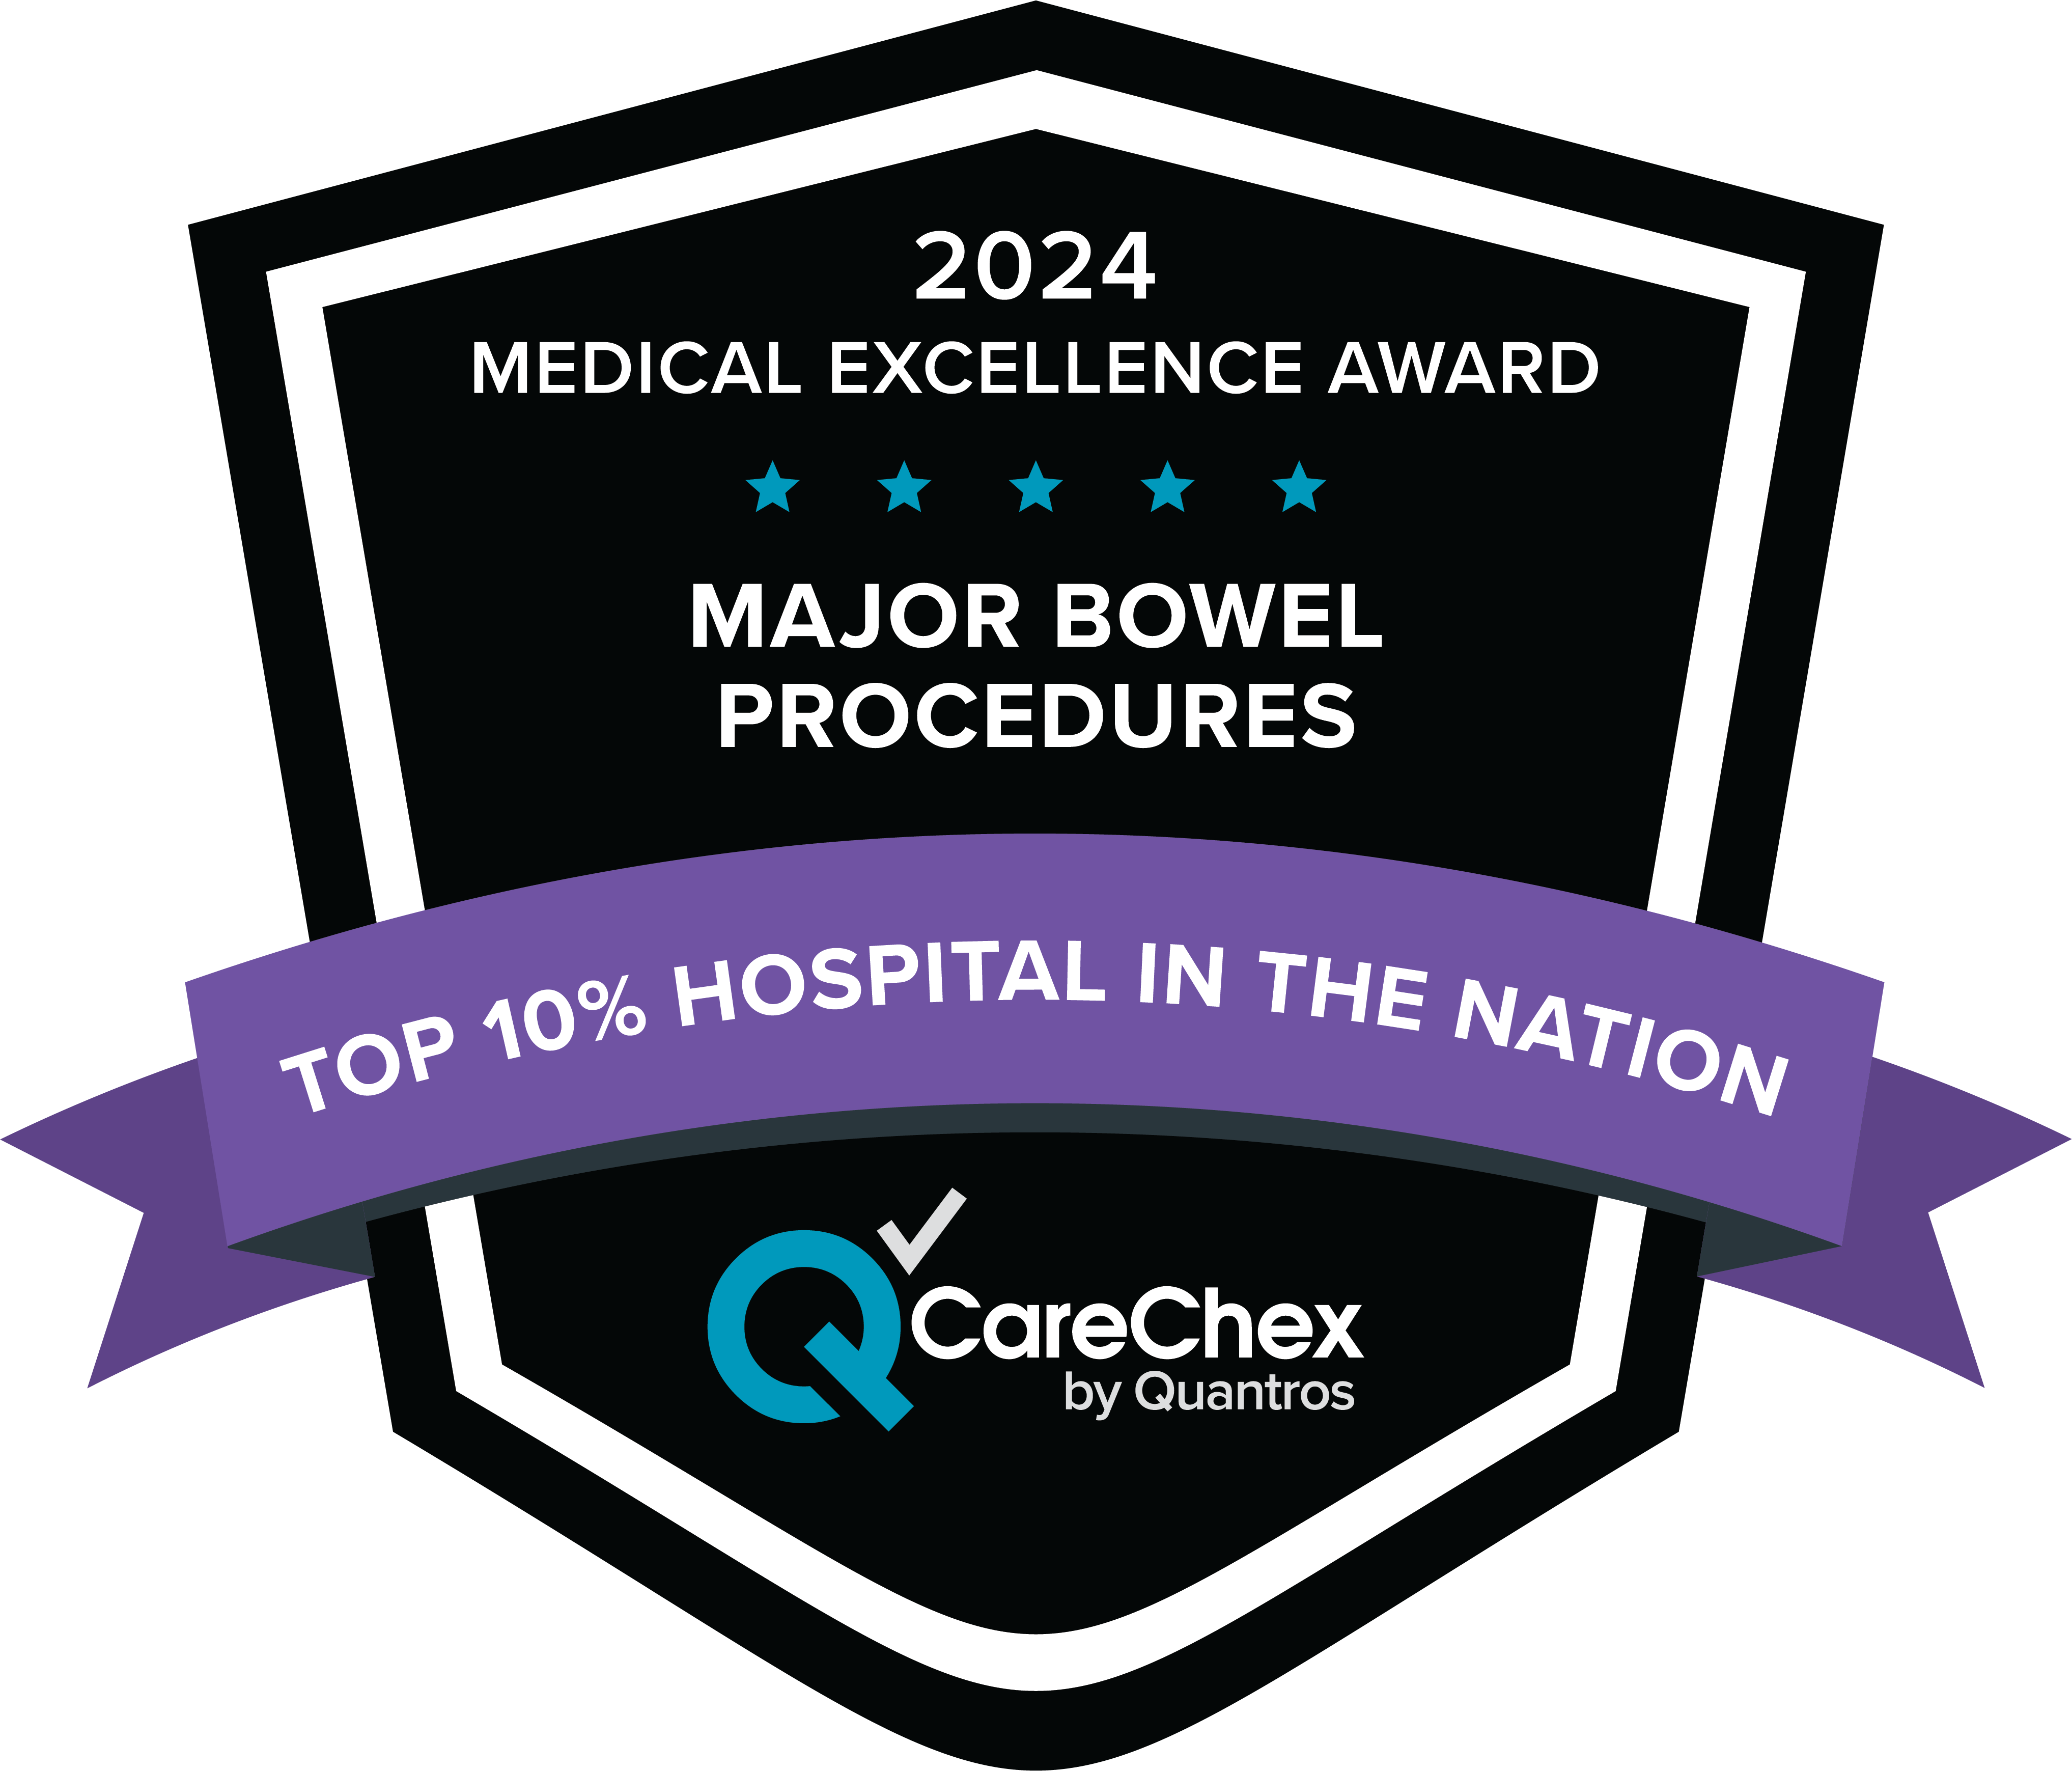 Awards badge for Top 10% Hospital in the Nation for Medical Excellence in Major Bowel Procedures – 2024 CareChex by Quantros